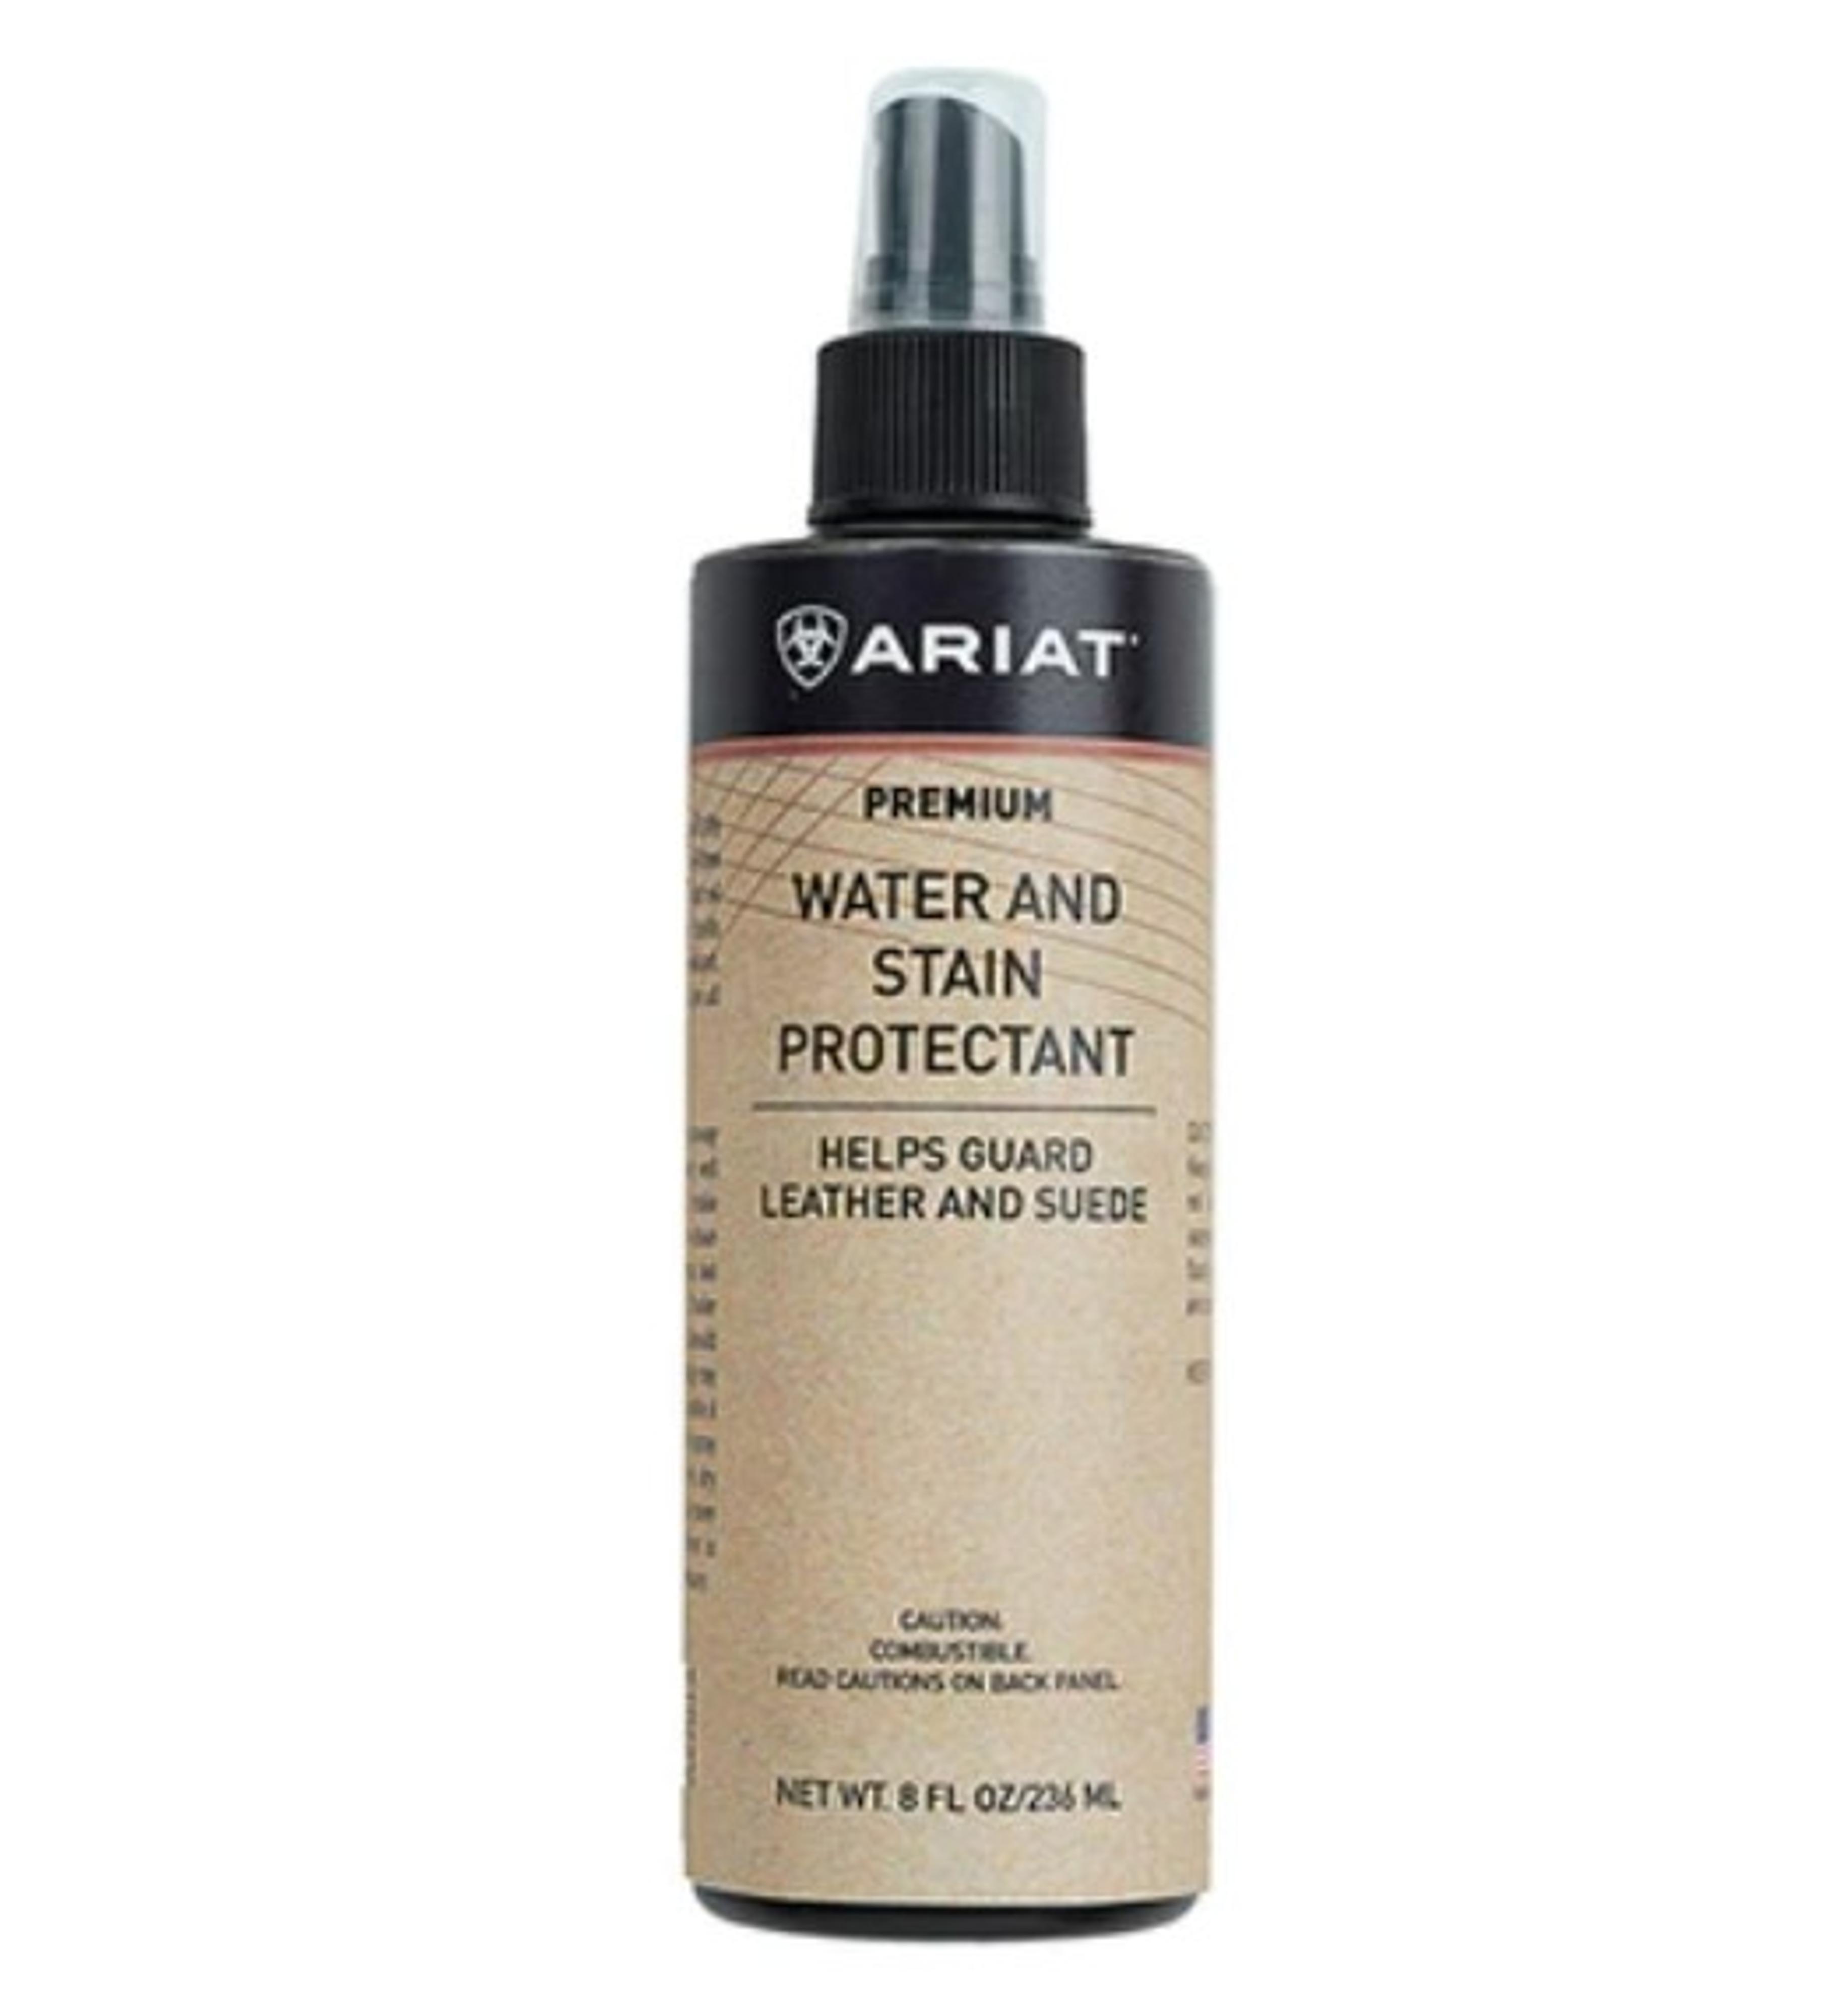  Water And Stain Protectant